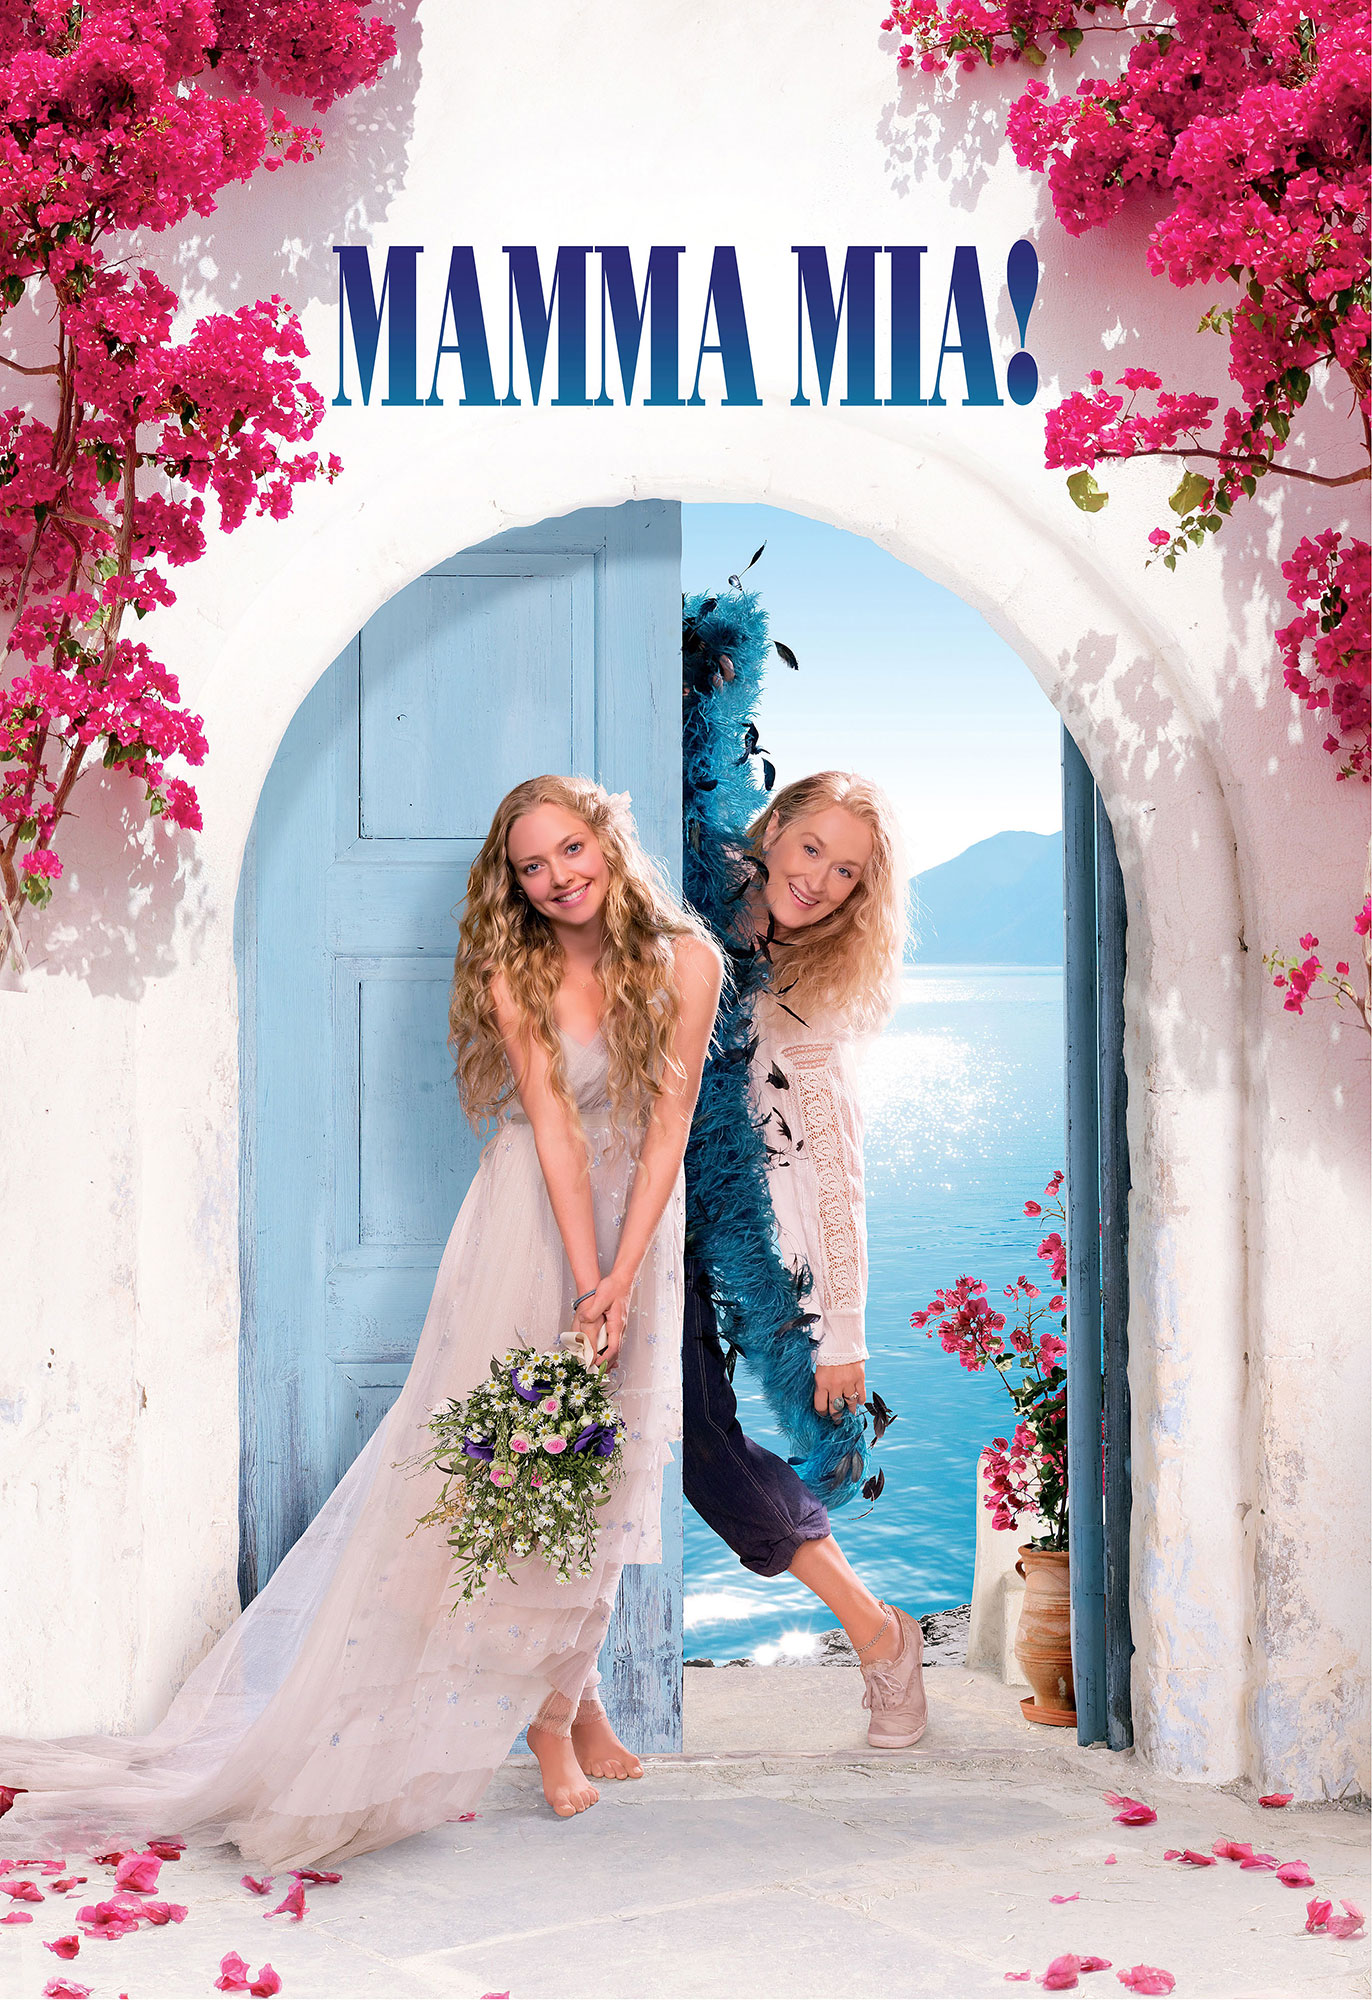 ‘Mamma Mia’ Cast Where Are They Now? Over View Your Daily News Source